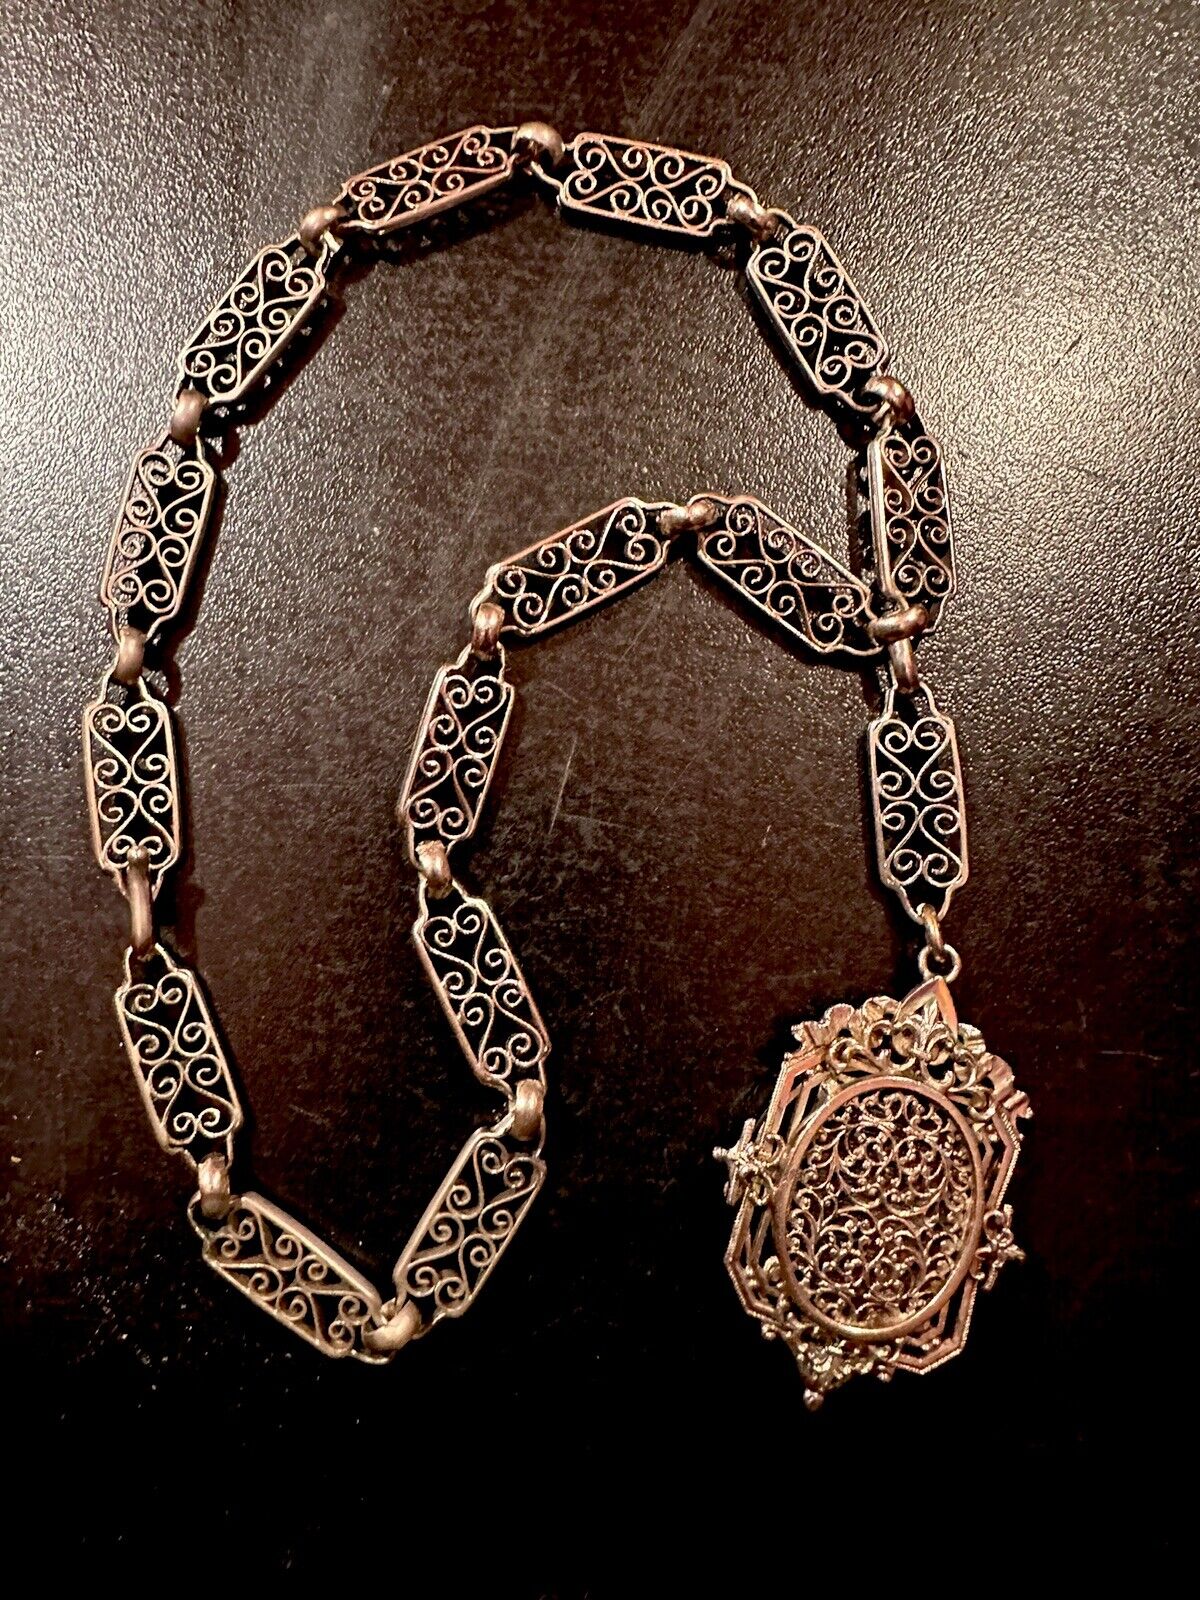 Rare Beautiful Souvenir Opening Medallion & Its Beautiful Chain French Antique Curiosa